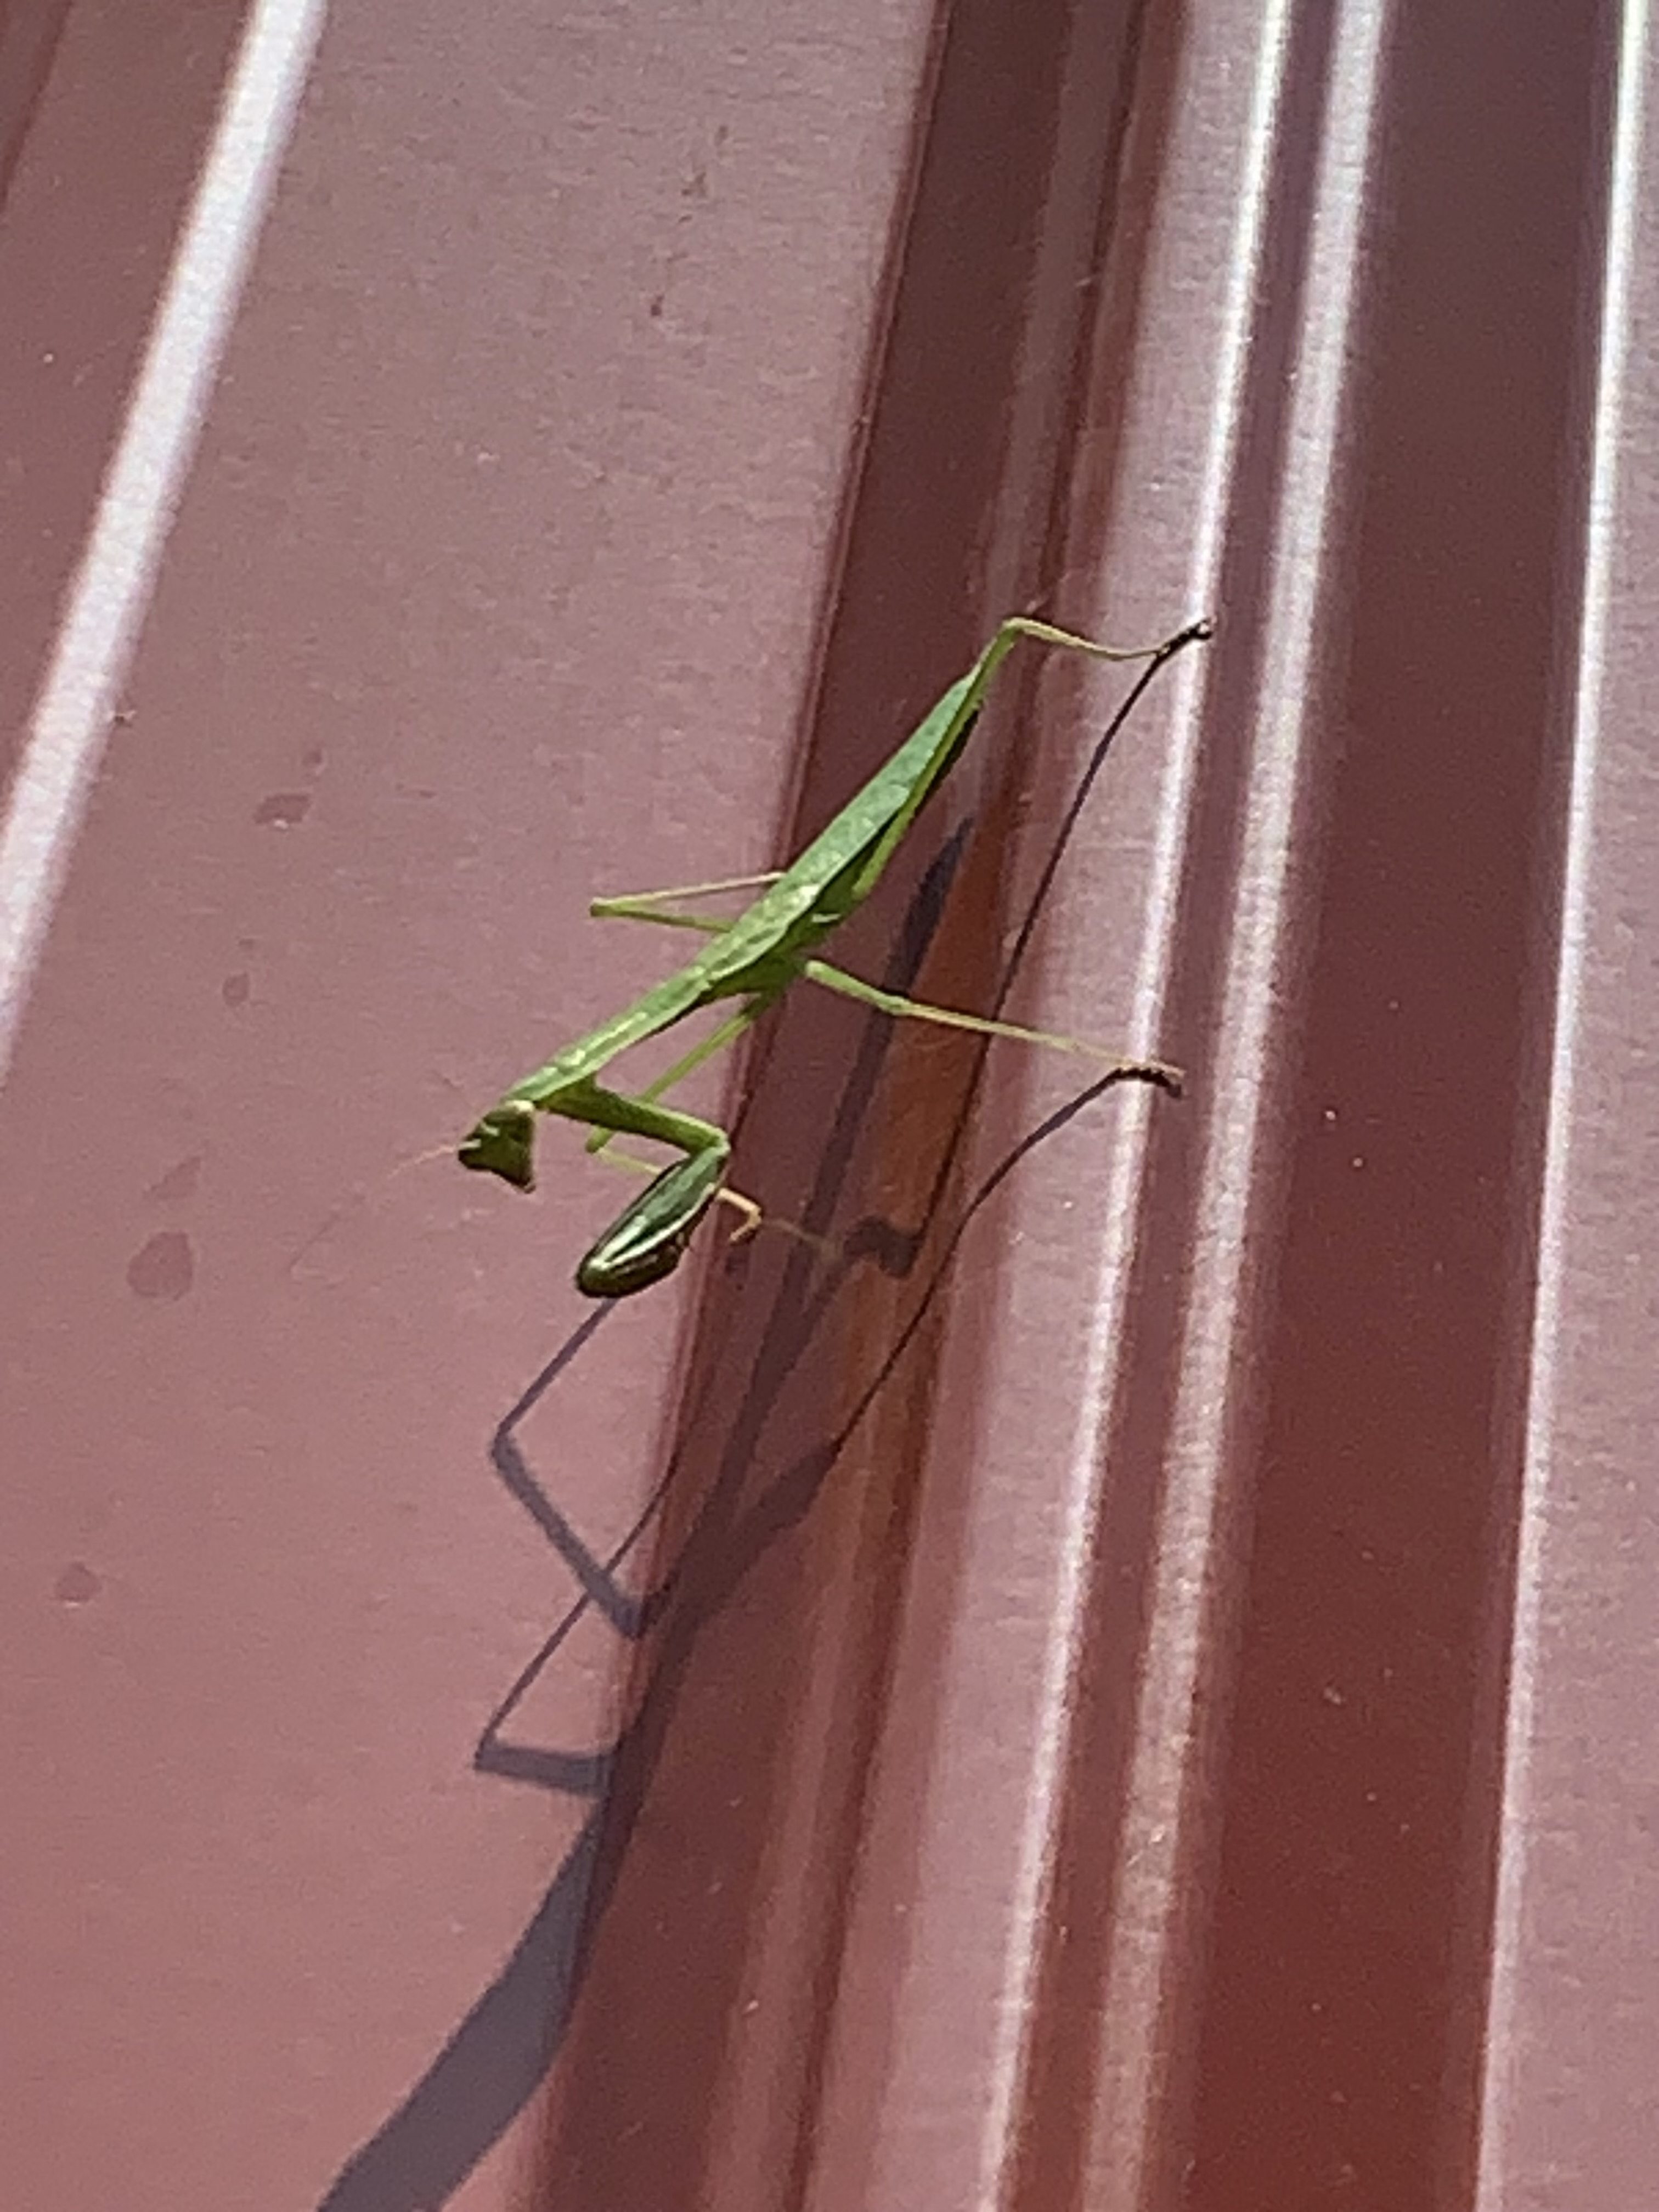 Slender green insect with triangular head and heavy forelegs stands head down on the side of a red farm building. Praying mantis sub adult nymph, wings are not yet present.